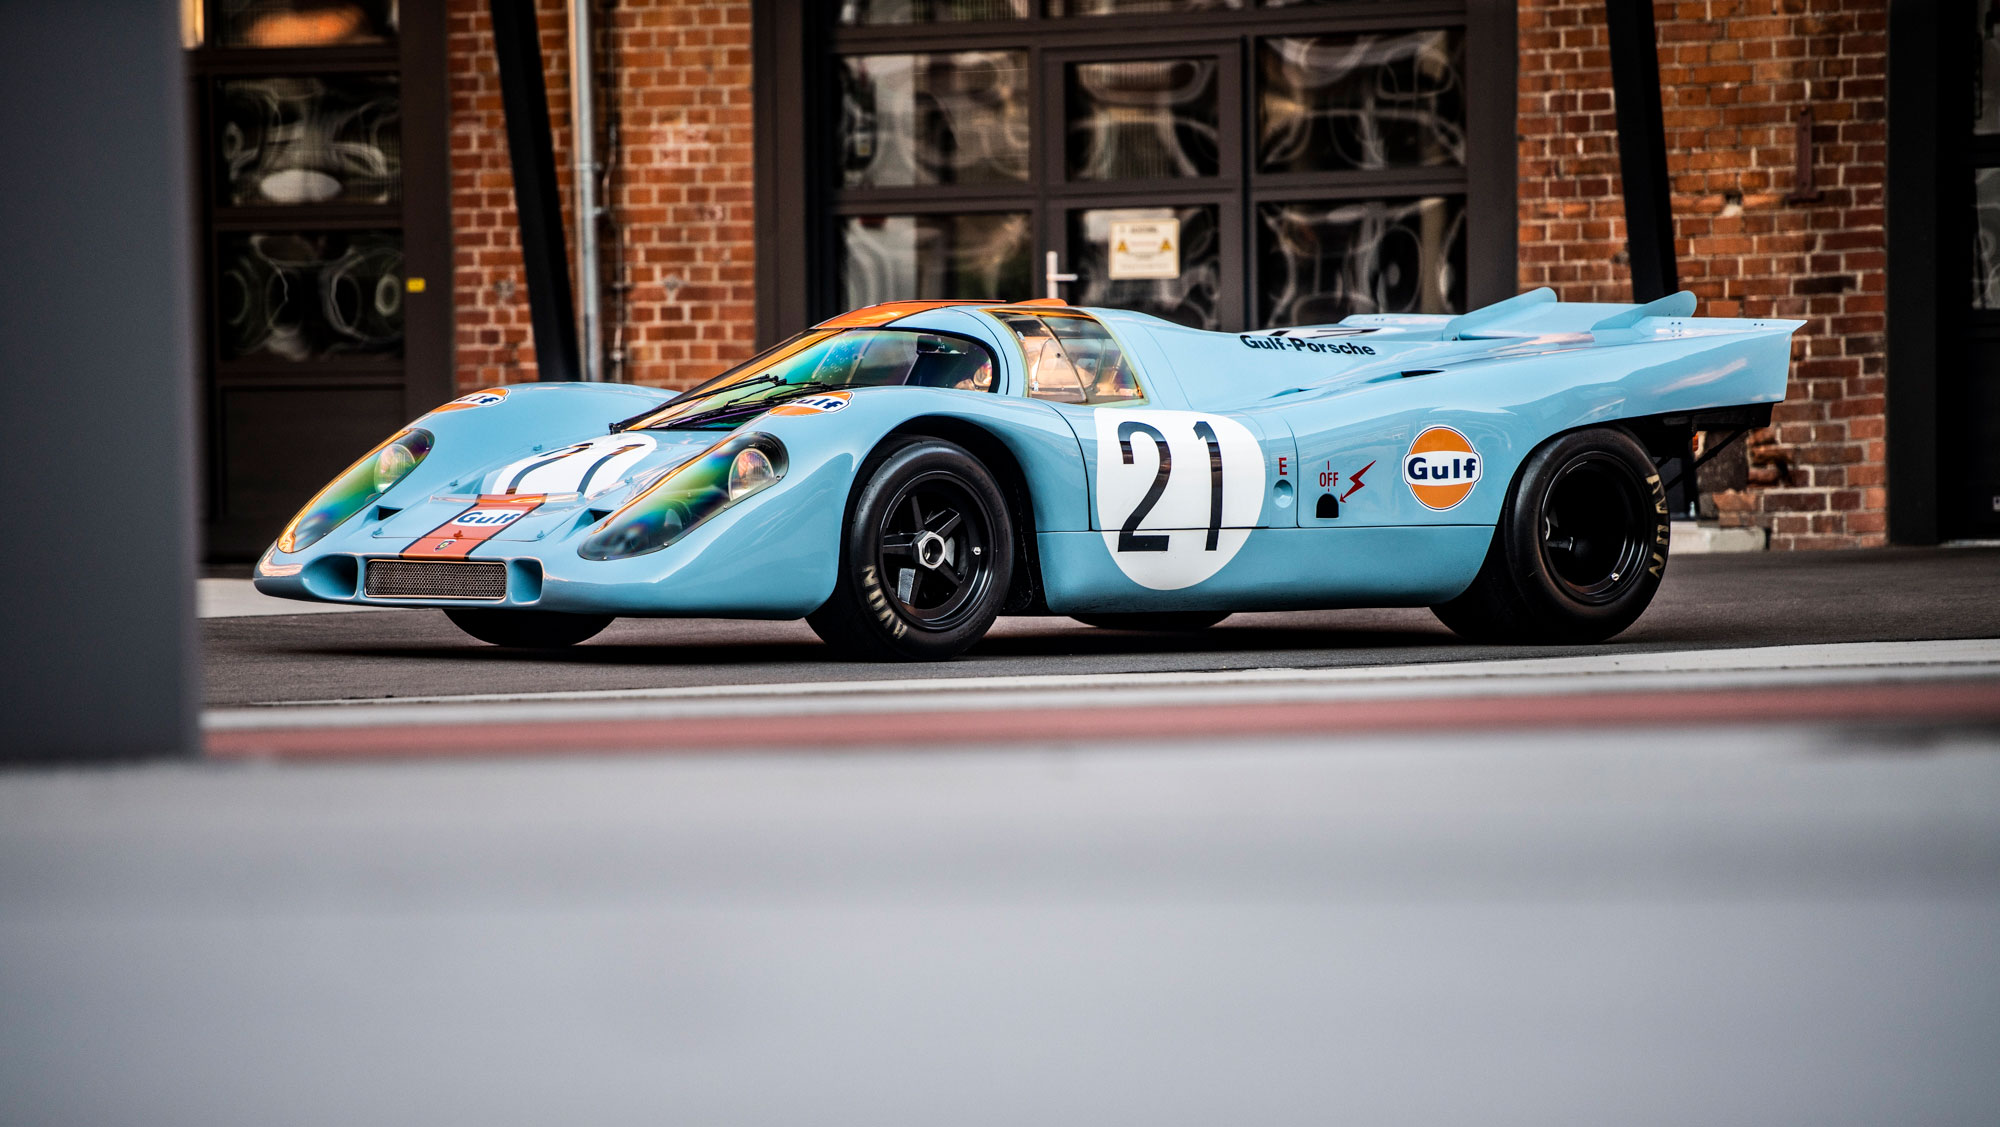 Porsche 917 K in iconic blue and white Gulf livery